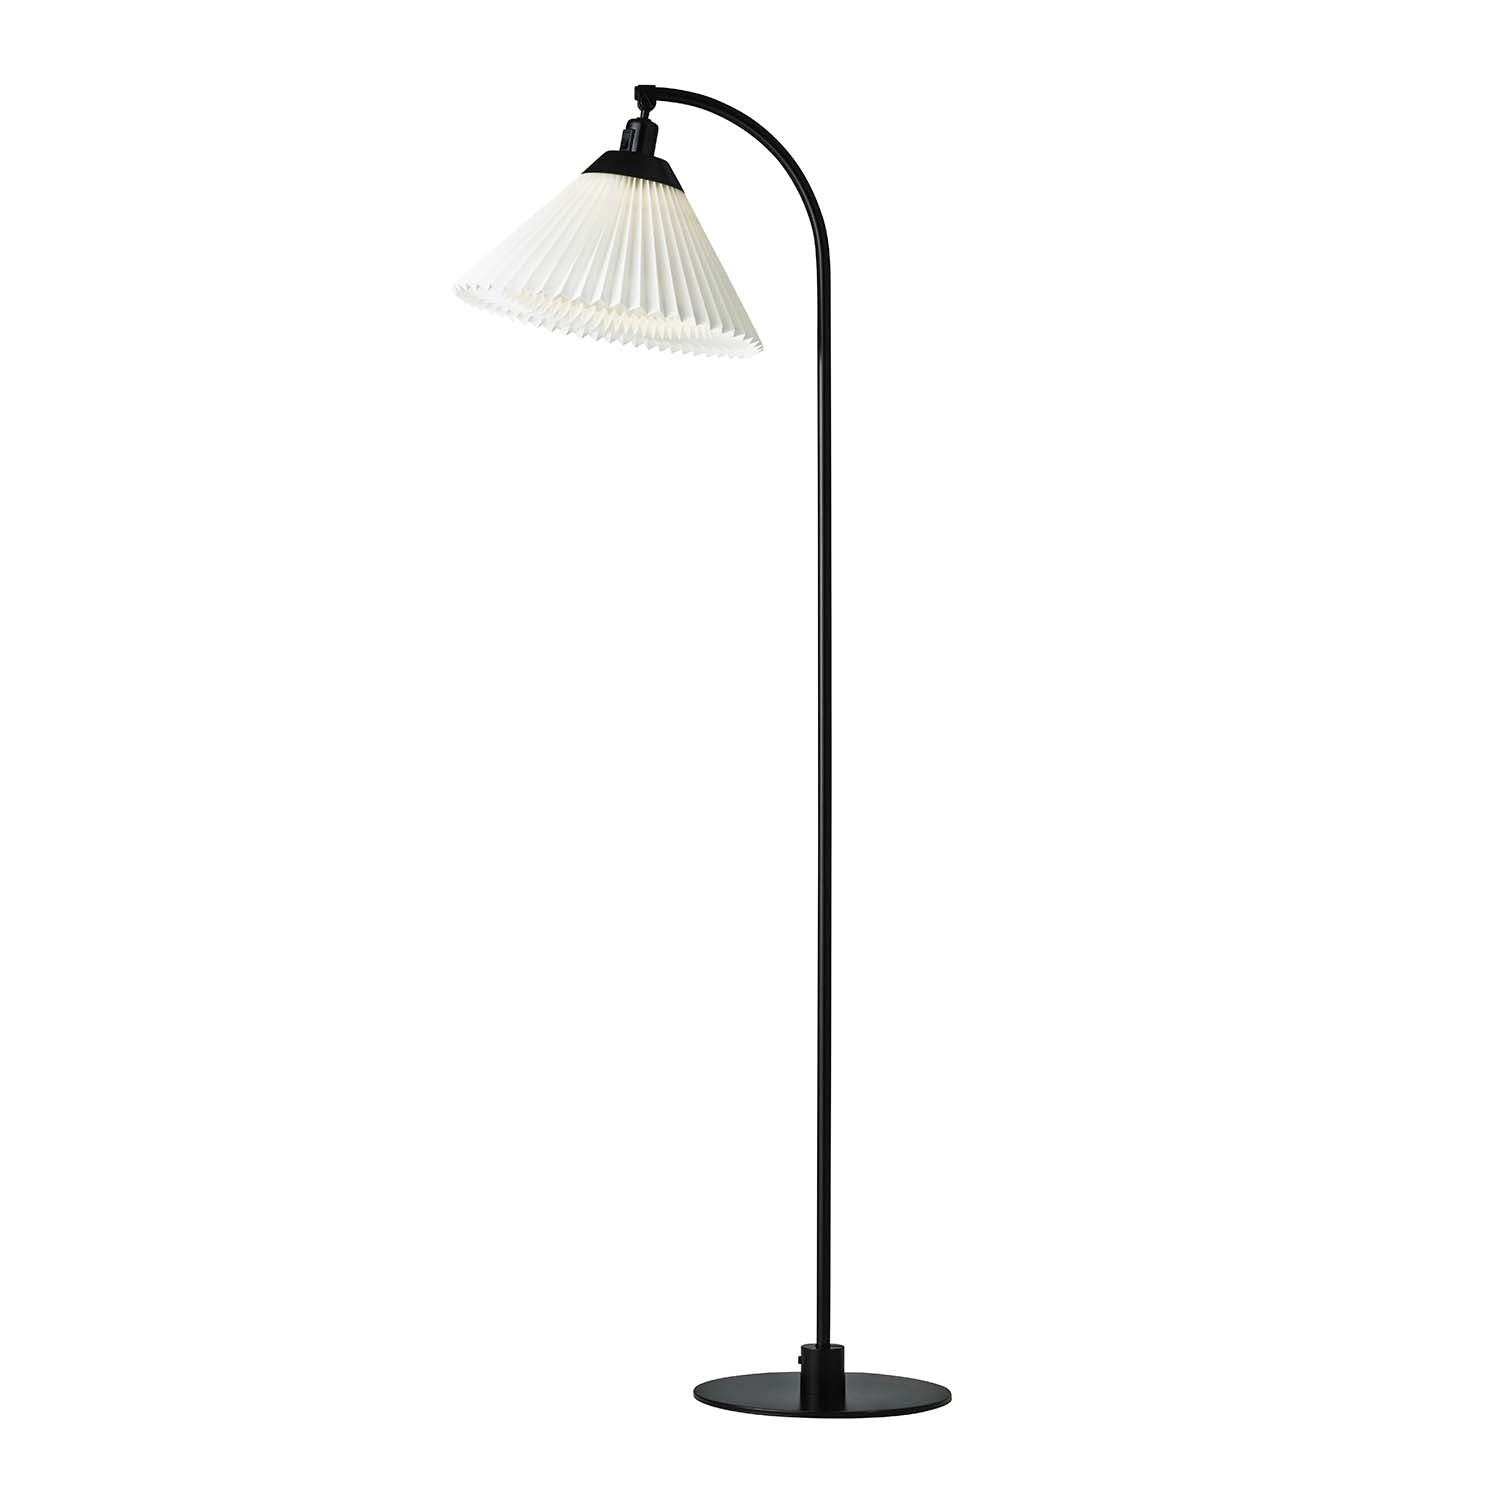 CLASSIC 368 - Vintage handcrafted black and white floor lamp